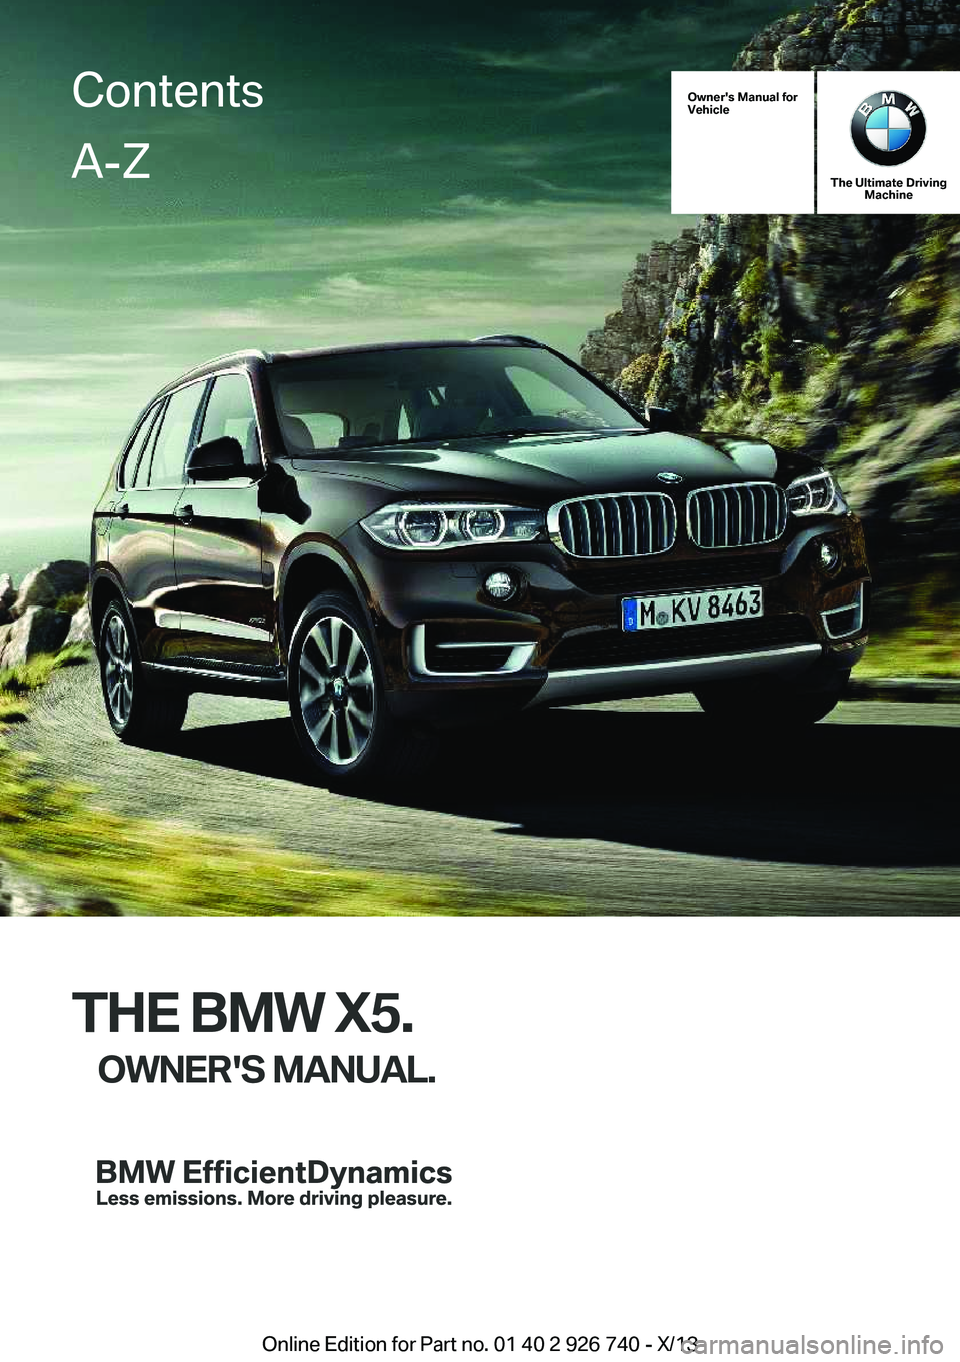 BMW X5 XDRIVE 50I 2014  Owners Manual Owner's Manual for
Vehicle
The Ultimate Driving Machine
THE BMW X5.
OWNER'S MANUAL.
ContentsA-Z
Online Edition for Part no. 01 40 2 926 740 - X/13   